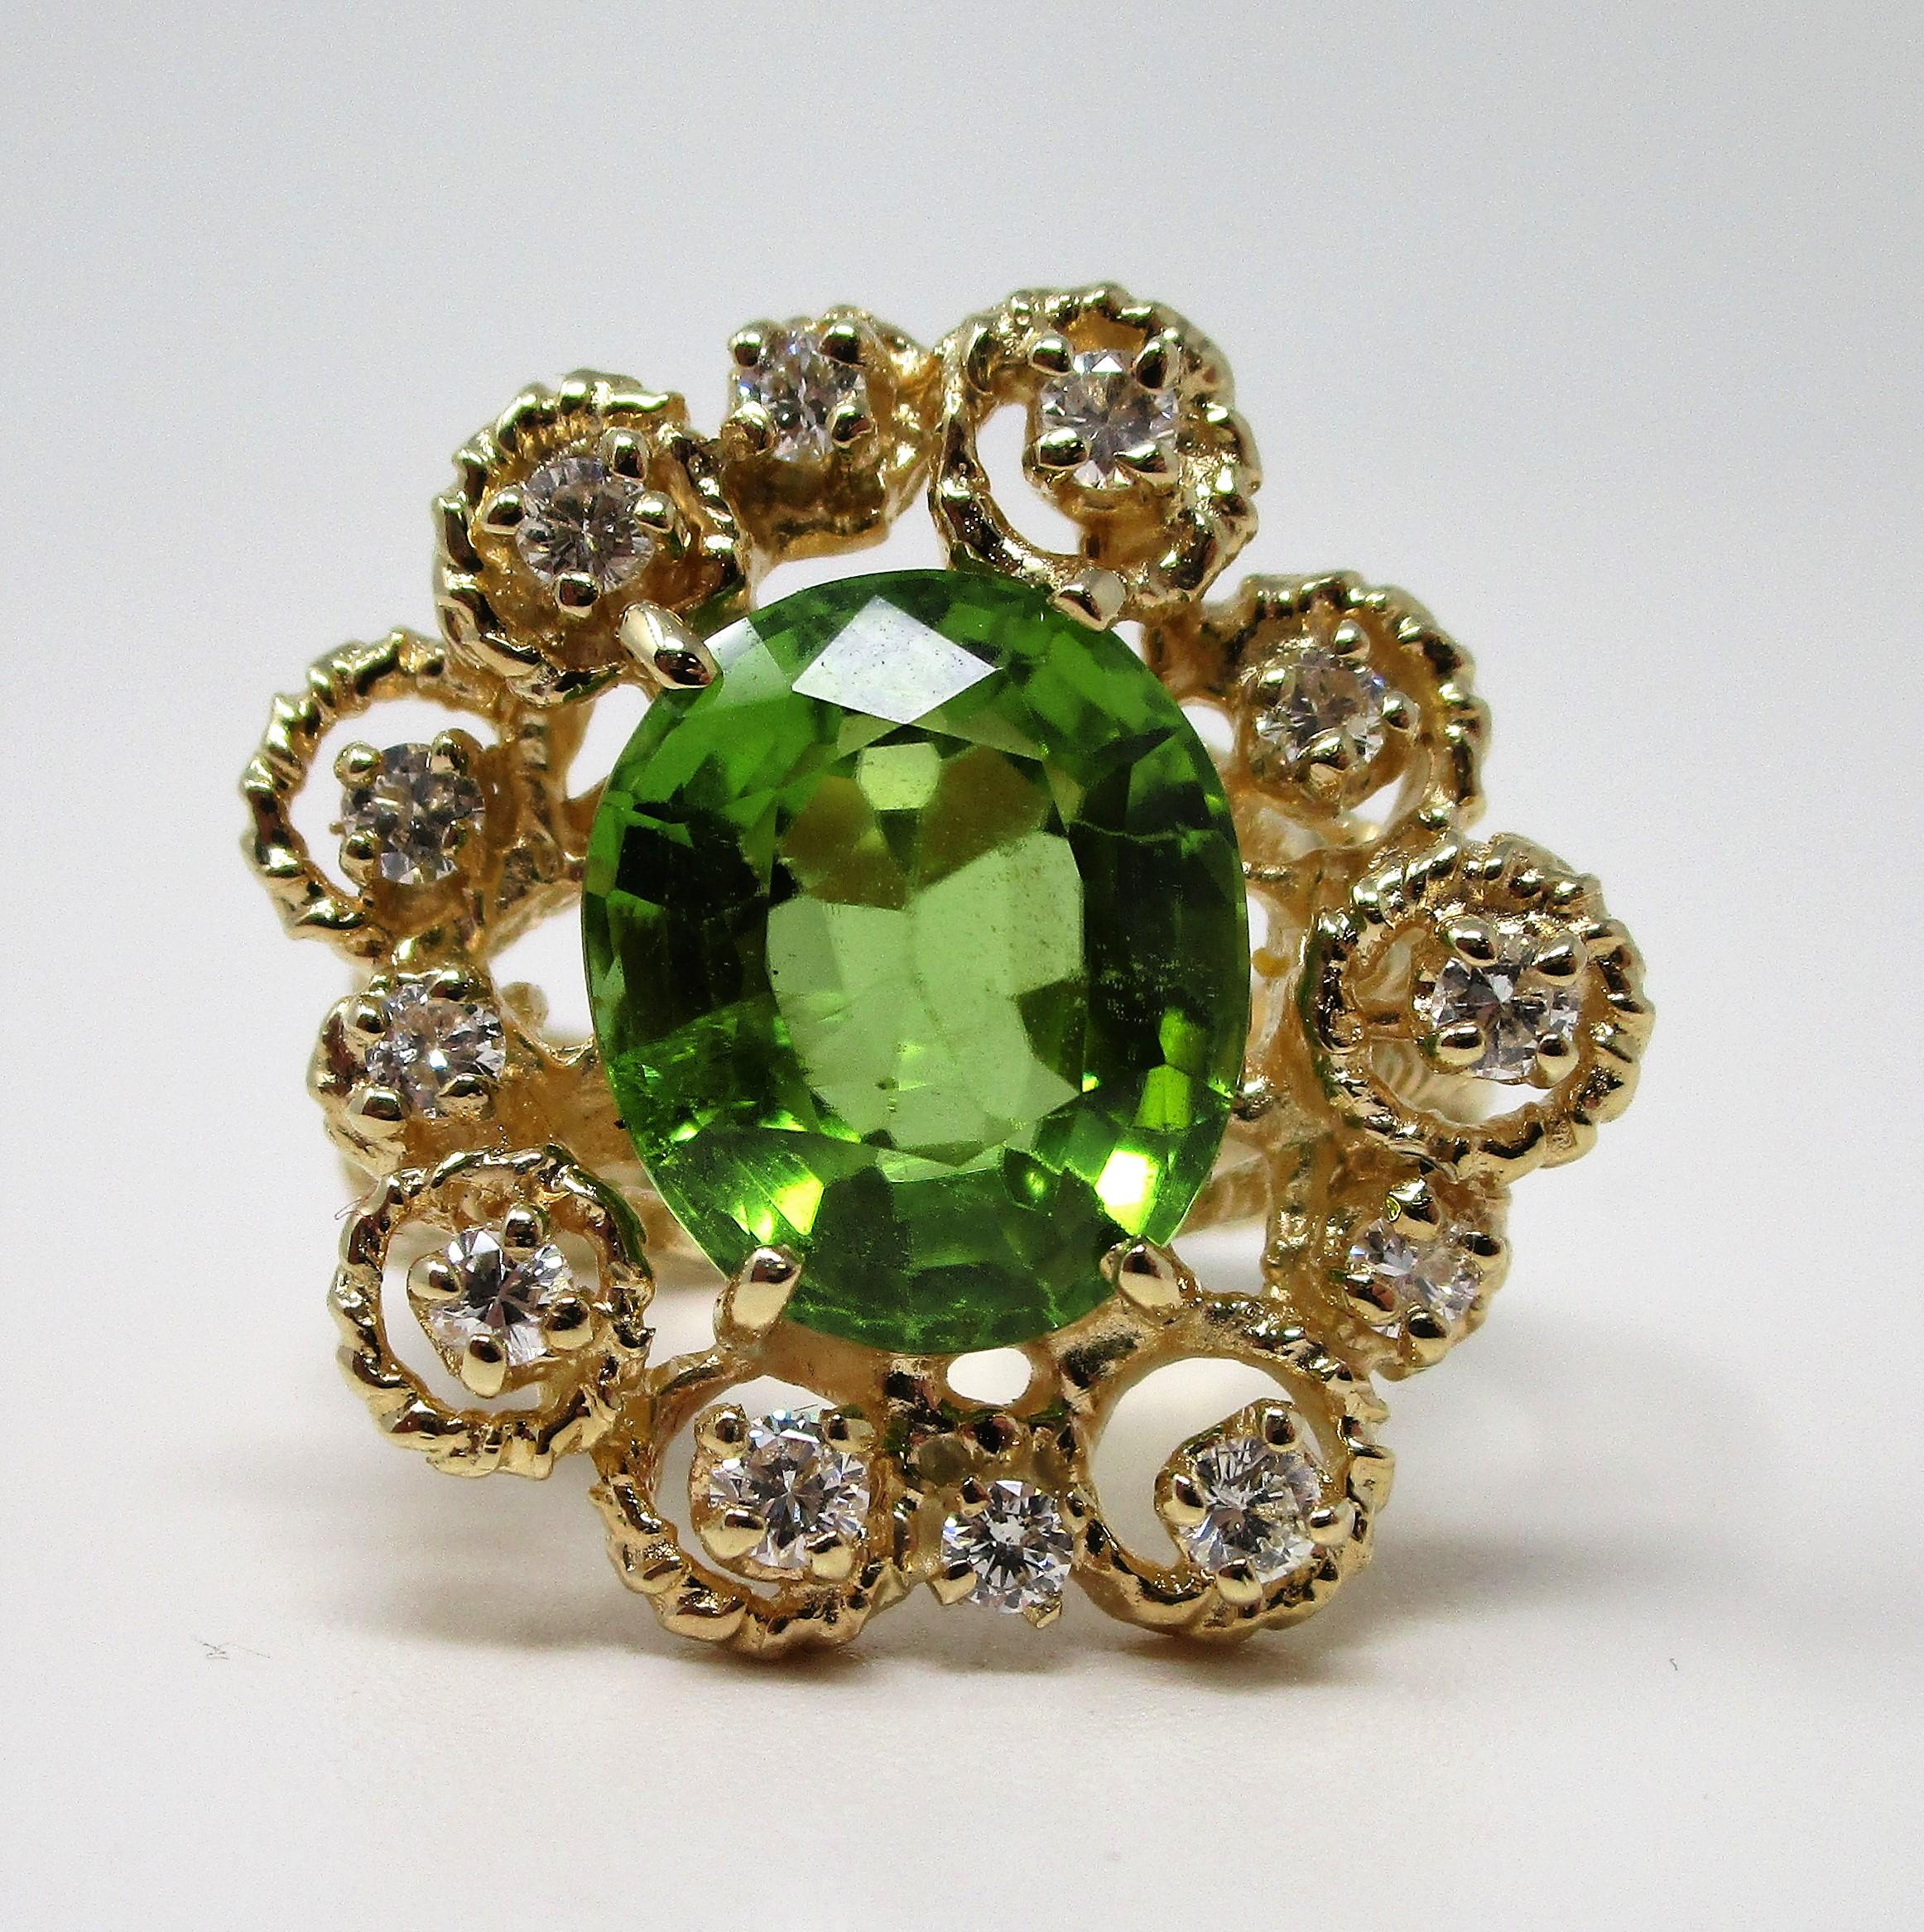 Delightful 5.52 carat peridot surrounded by 0.50 carats of diamonds in textured 14 karat yellow gold.  This cheerful ring weighs 9.5 grams and is a size 6 1/2.